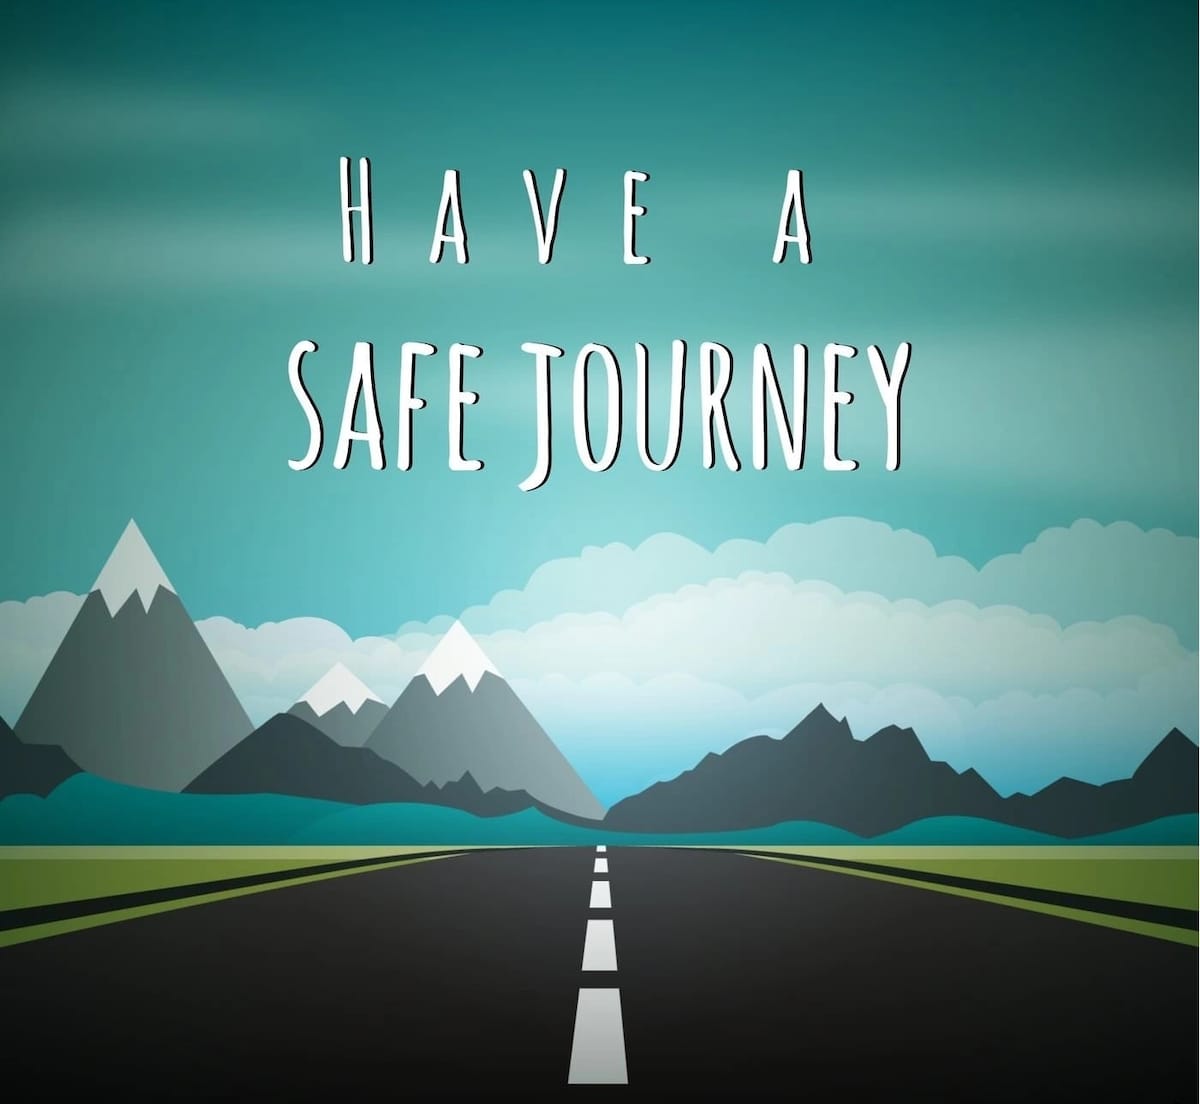 Safe journey message to loved one